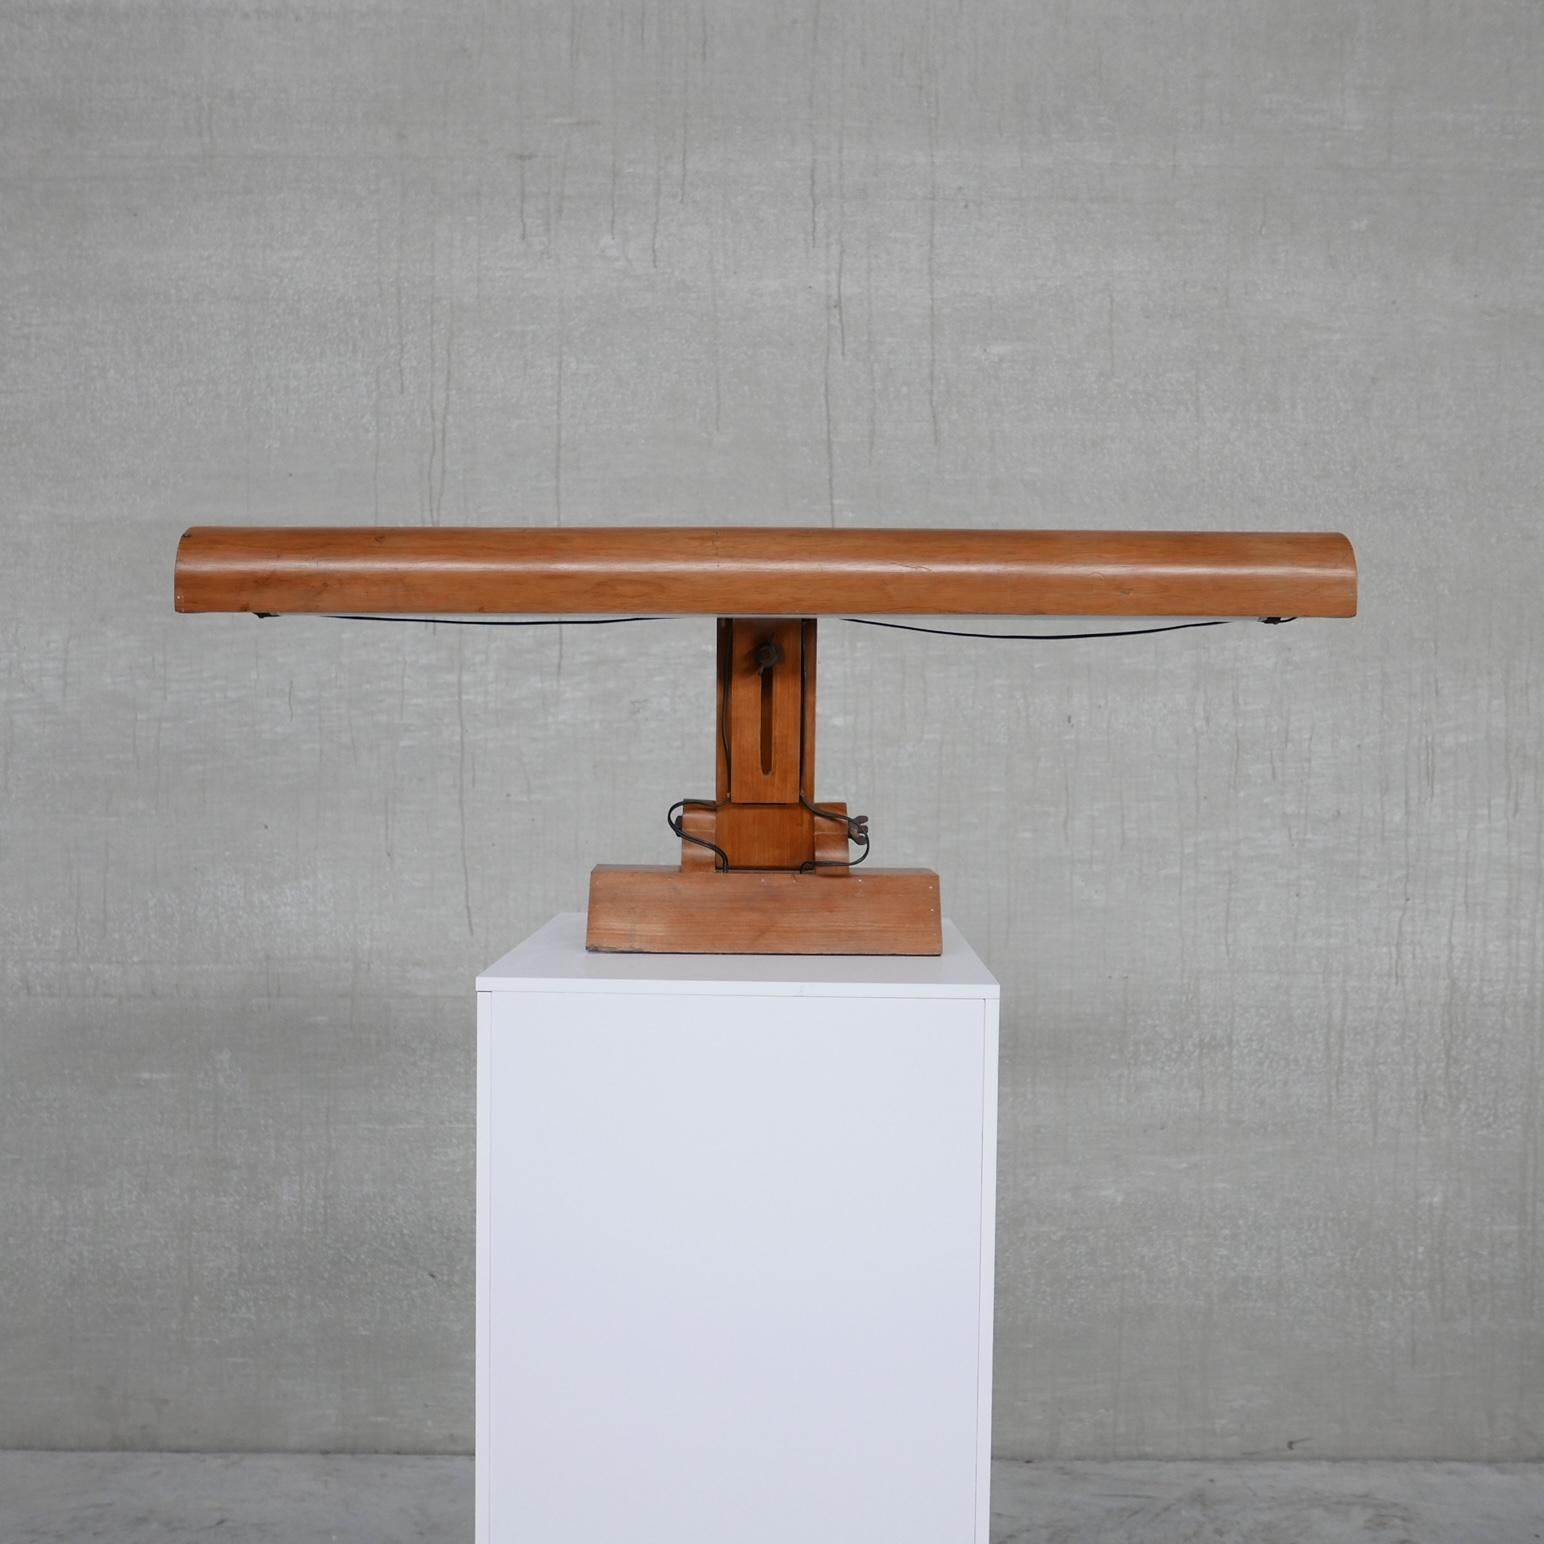 An unusual extra wide table lamp. 

Adjustable in height and angle. 

Belgium, c1940s. 

Possible used in a theatre to read or direct plays/music etc. 

Location: Belgium Gallery. 

Dimensions: 110 W x 20 D x 40 H (lowest) x 51 H (tallest)